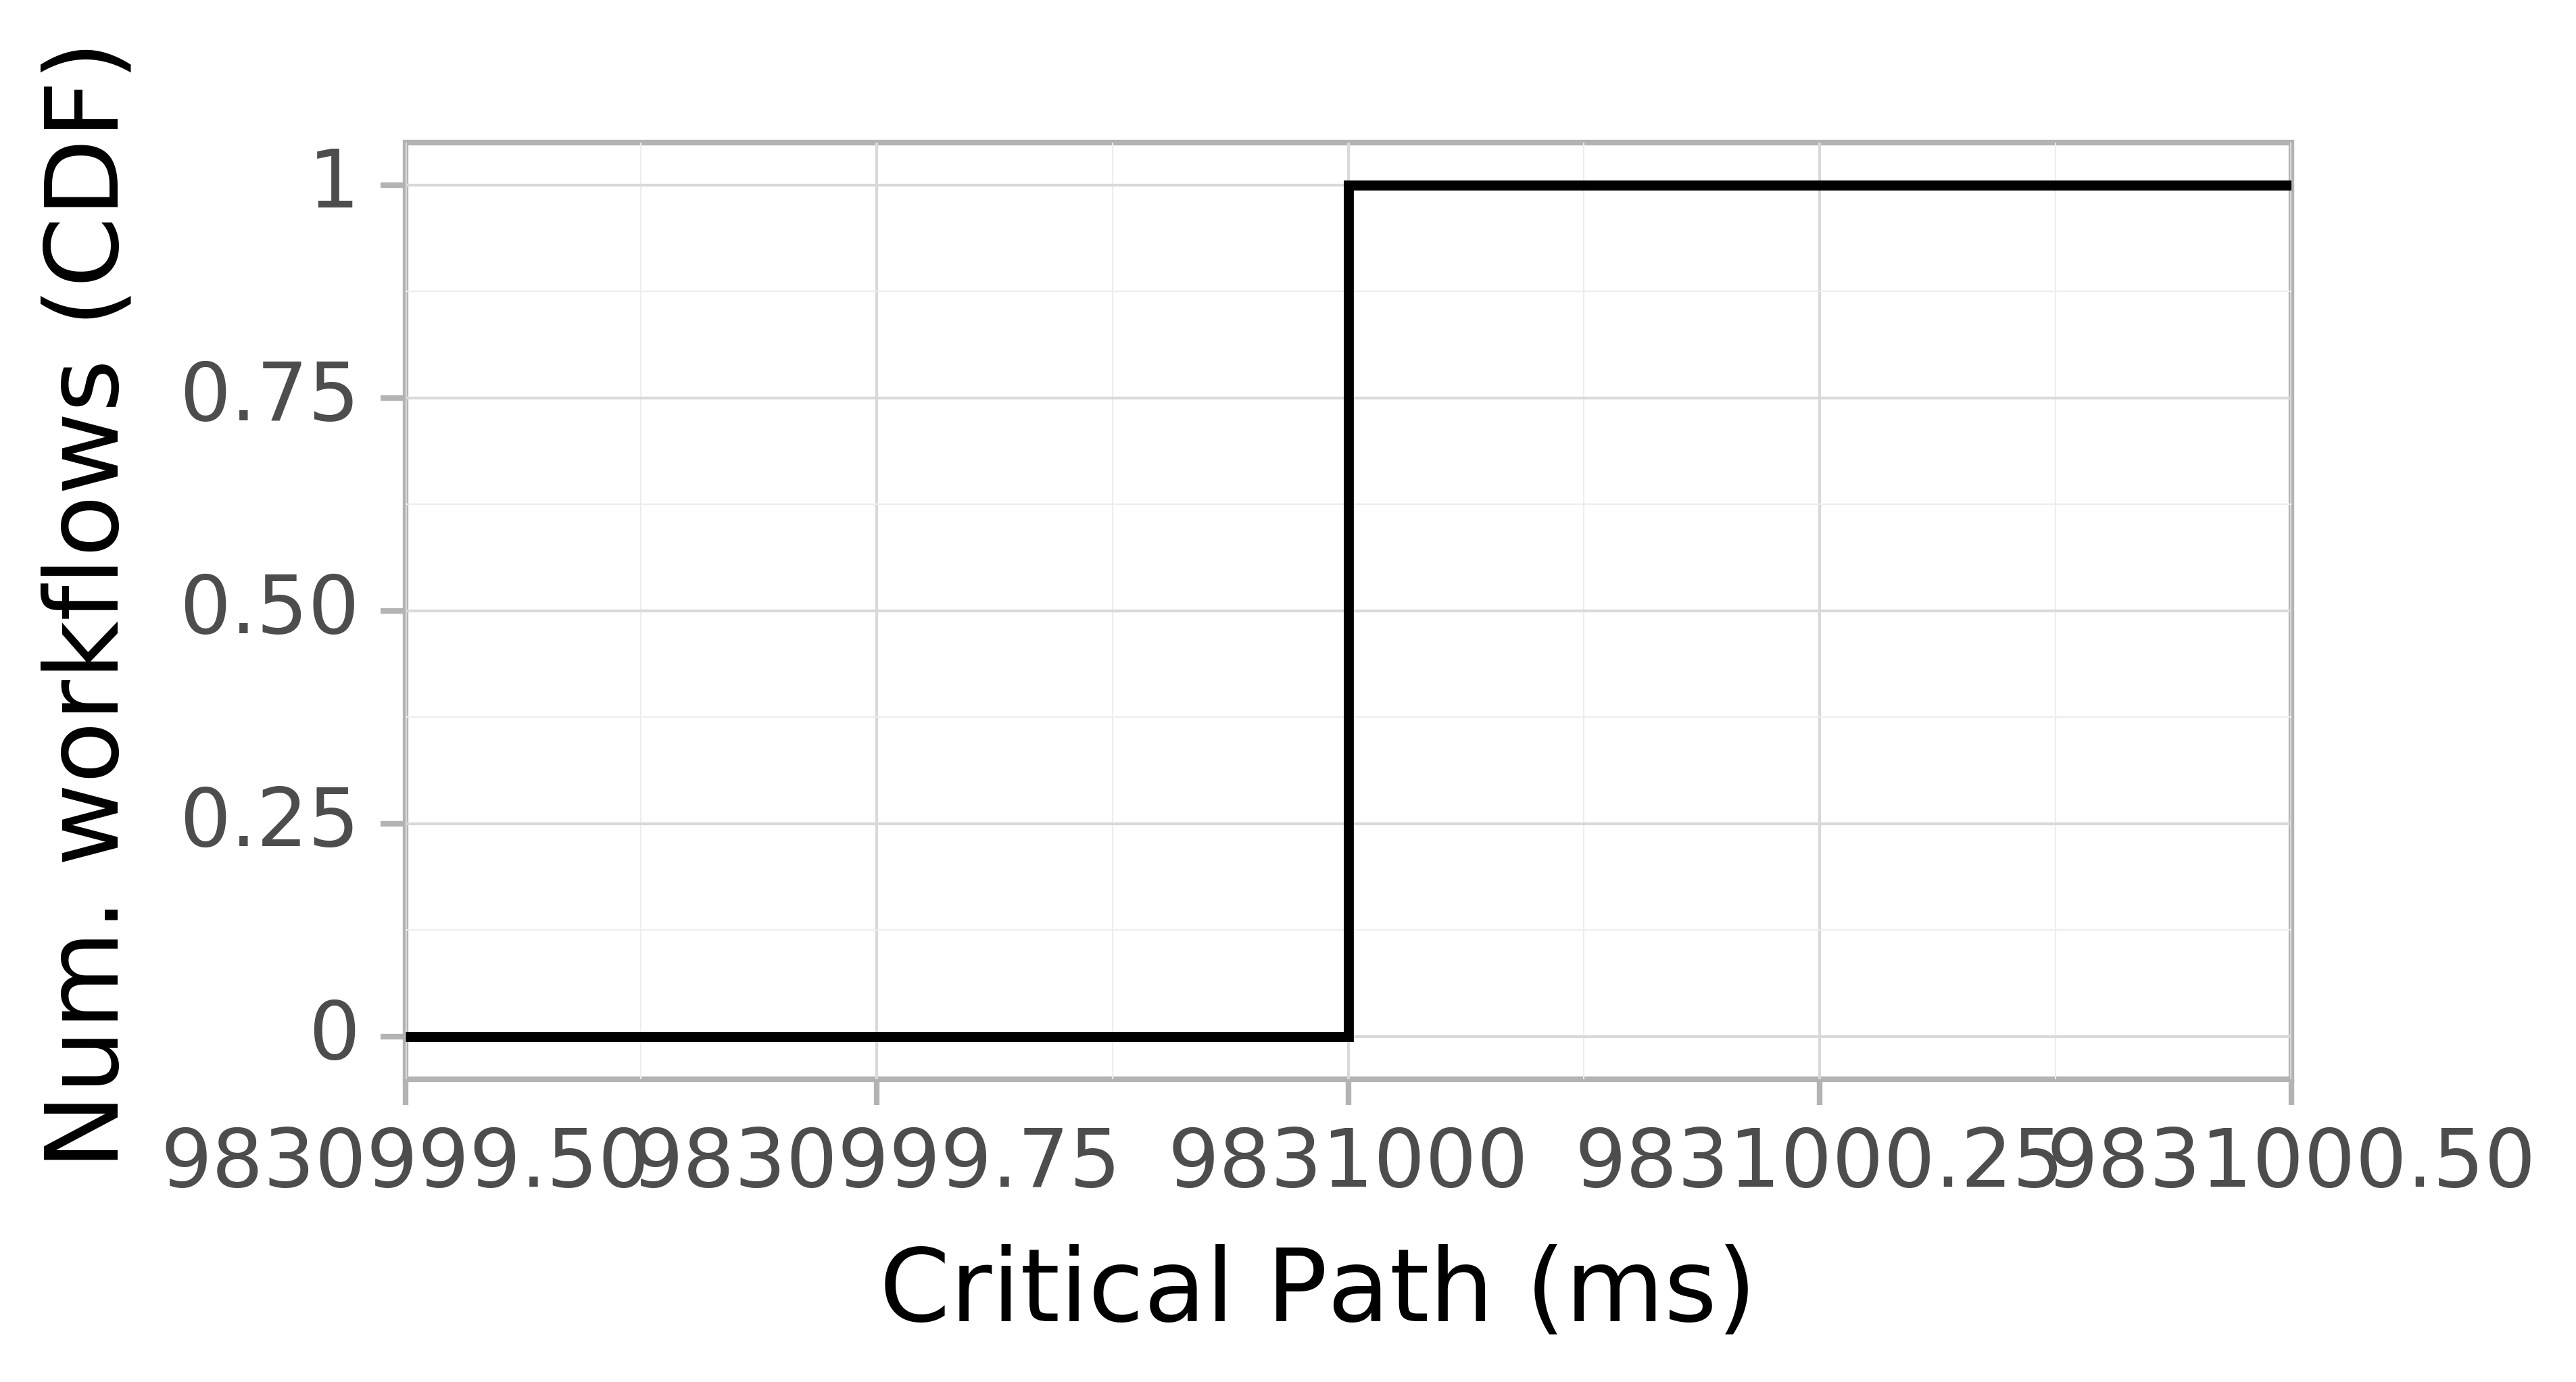 Job runtime CDF graph for the Pegasus_P1 trace.